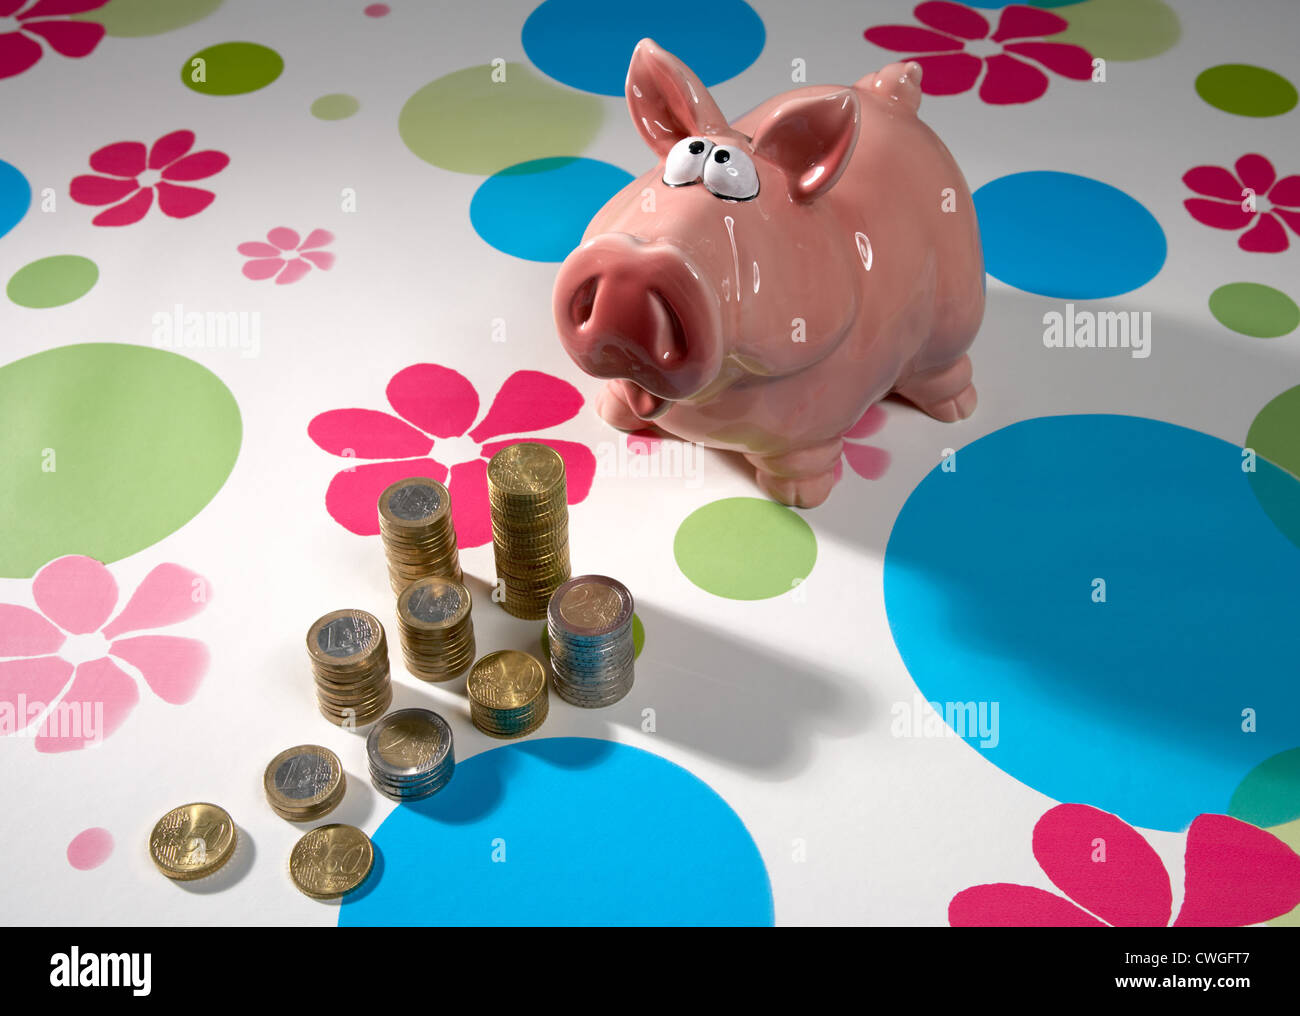 Piggy bank with Muenzstapeln on patterned background Stock Photo